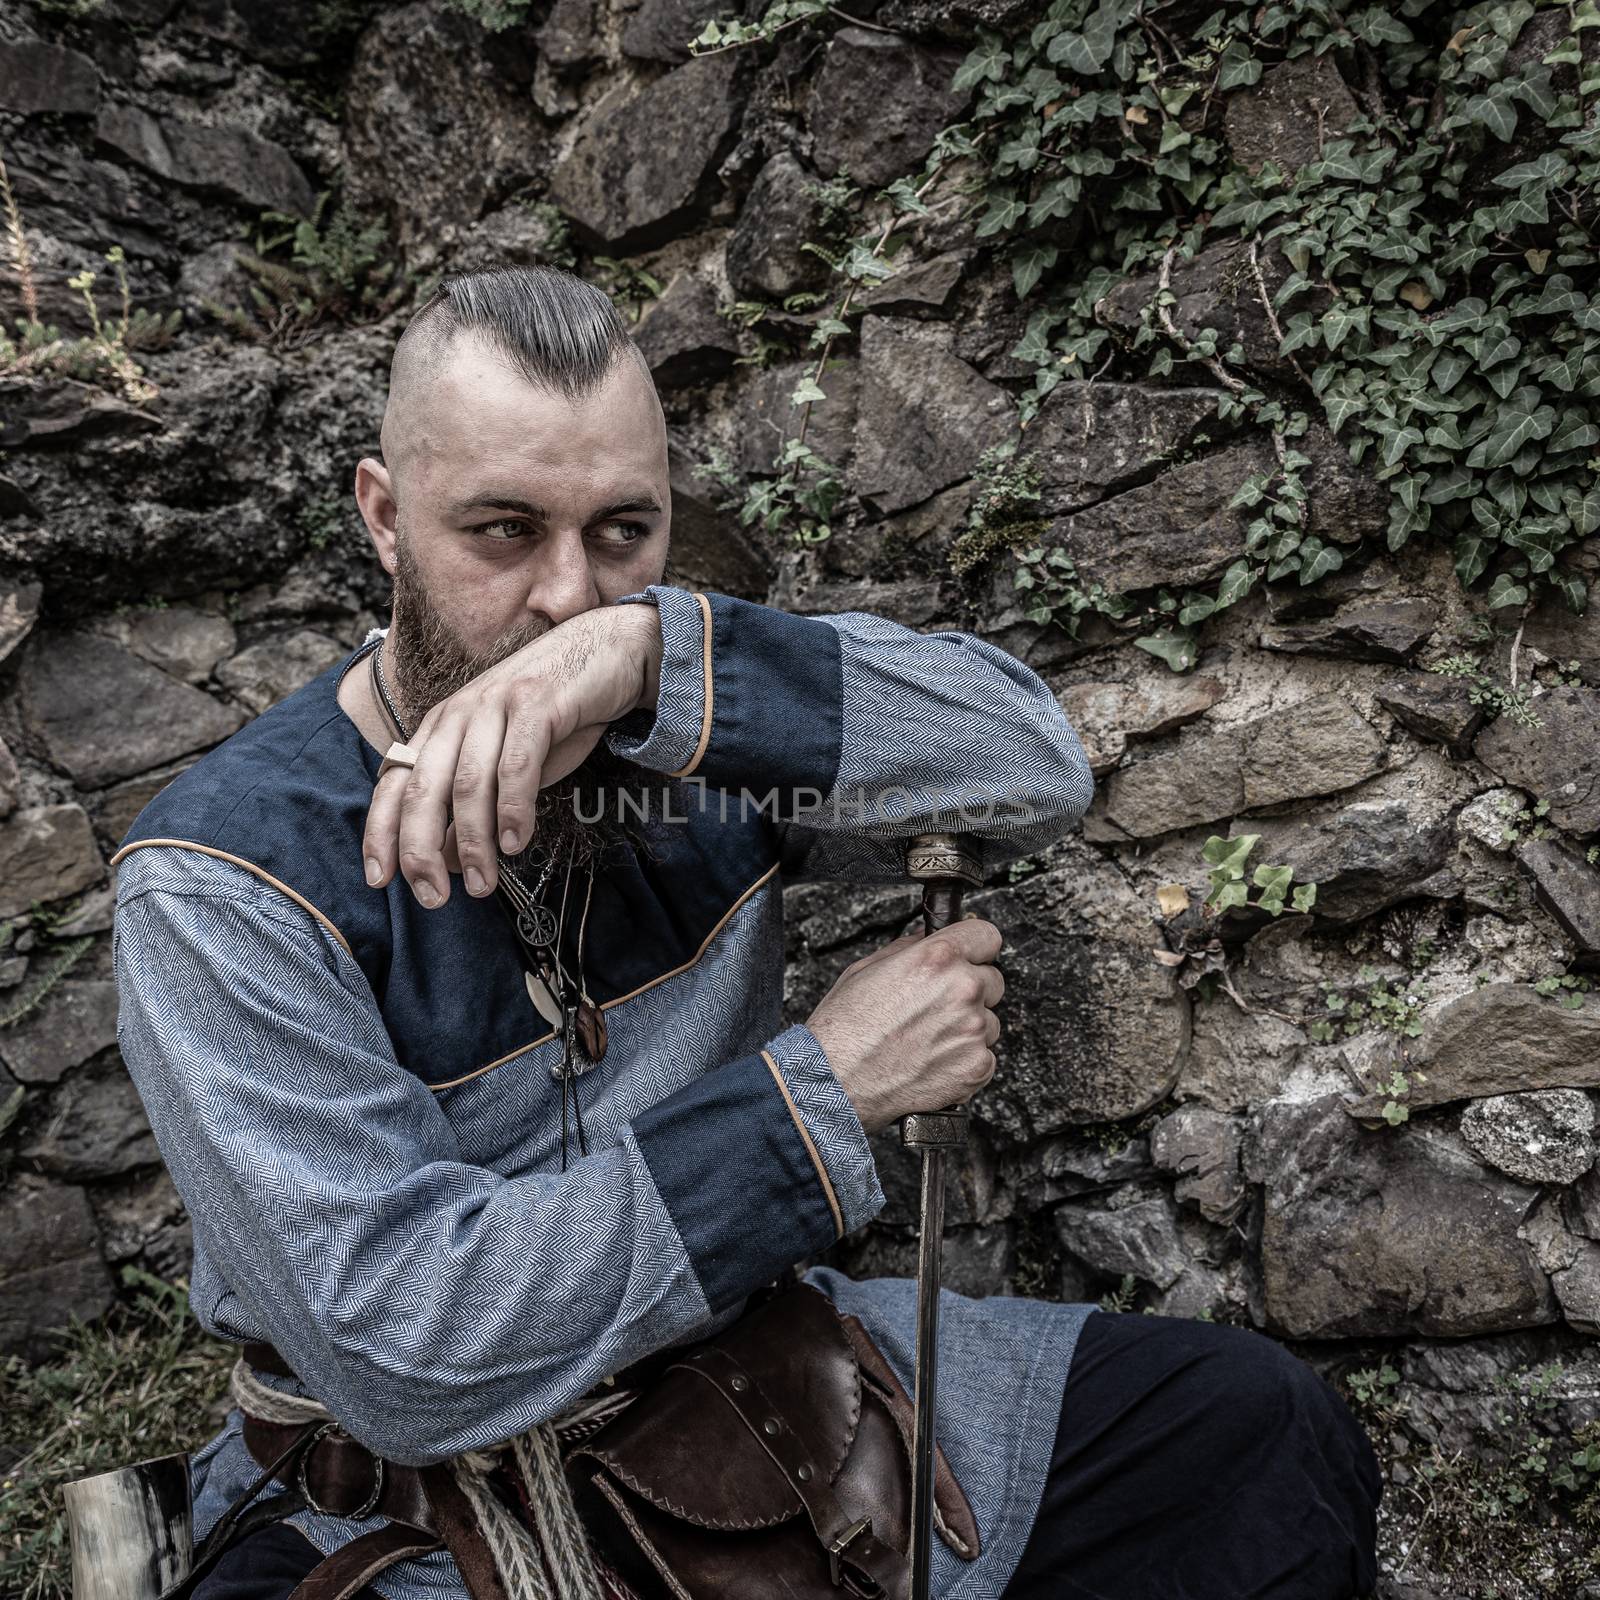 Viking warrior with thick beard sits thoughtfully in front of a stone wall, image of historical re-enactment among medieval ruins